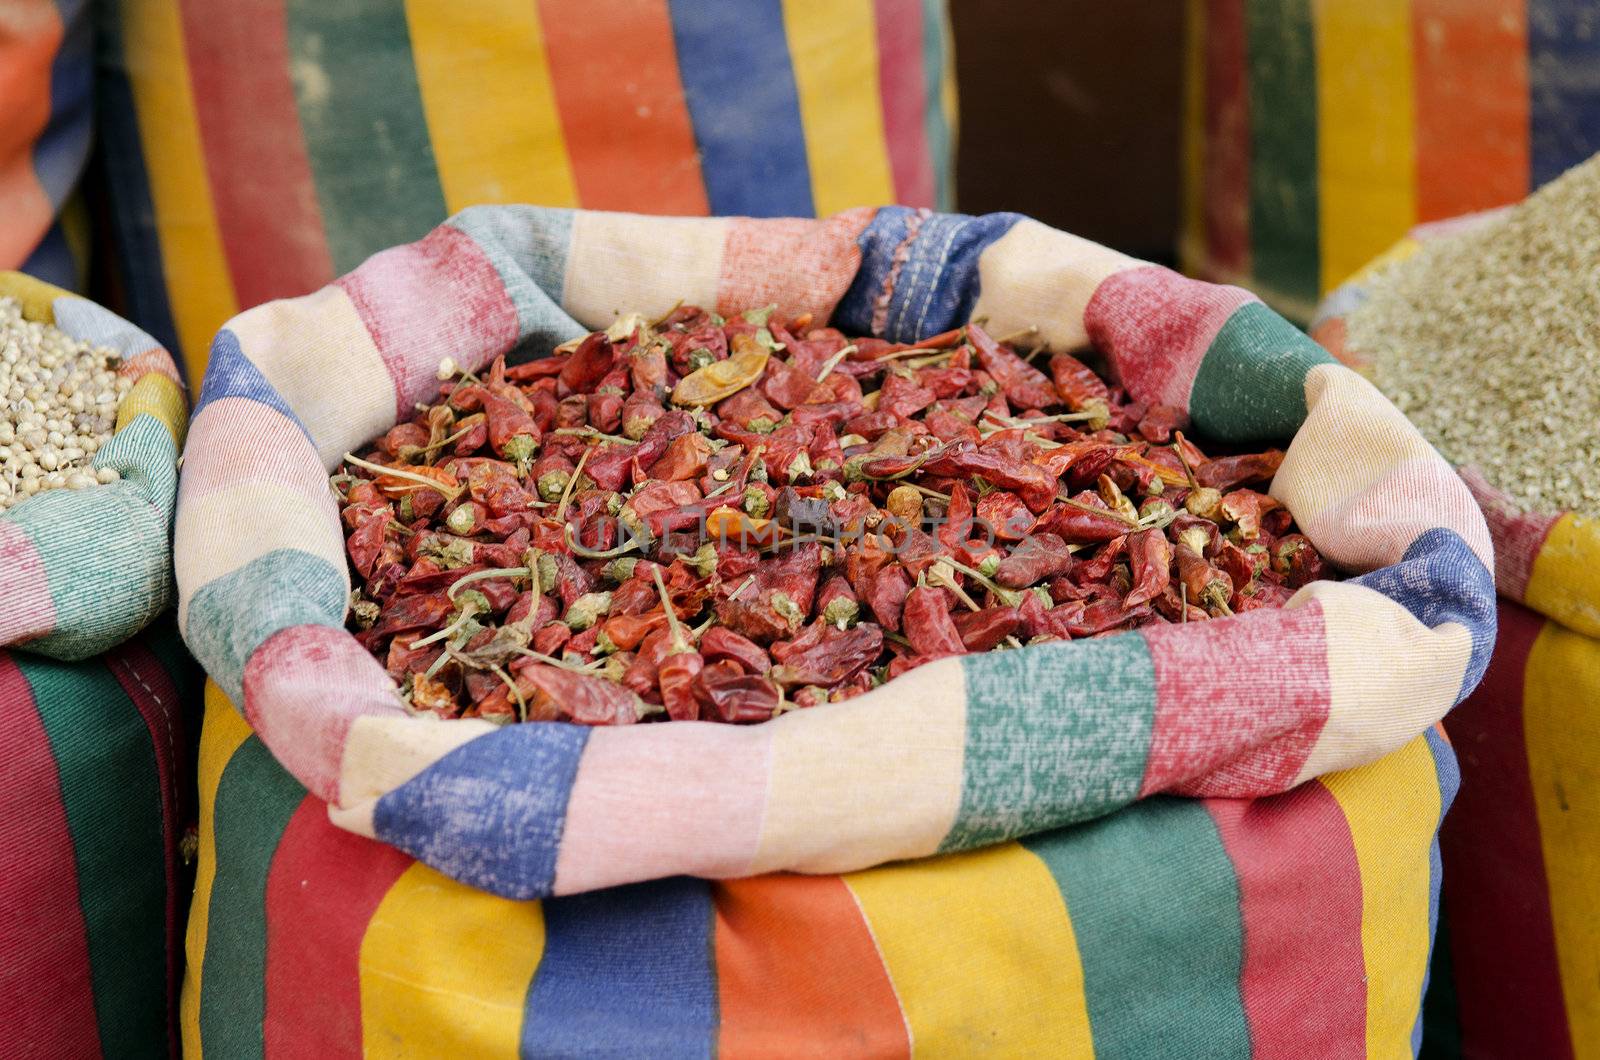 dried chilli peppers in middle east souk market cairo egypt